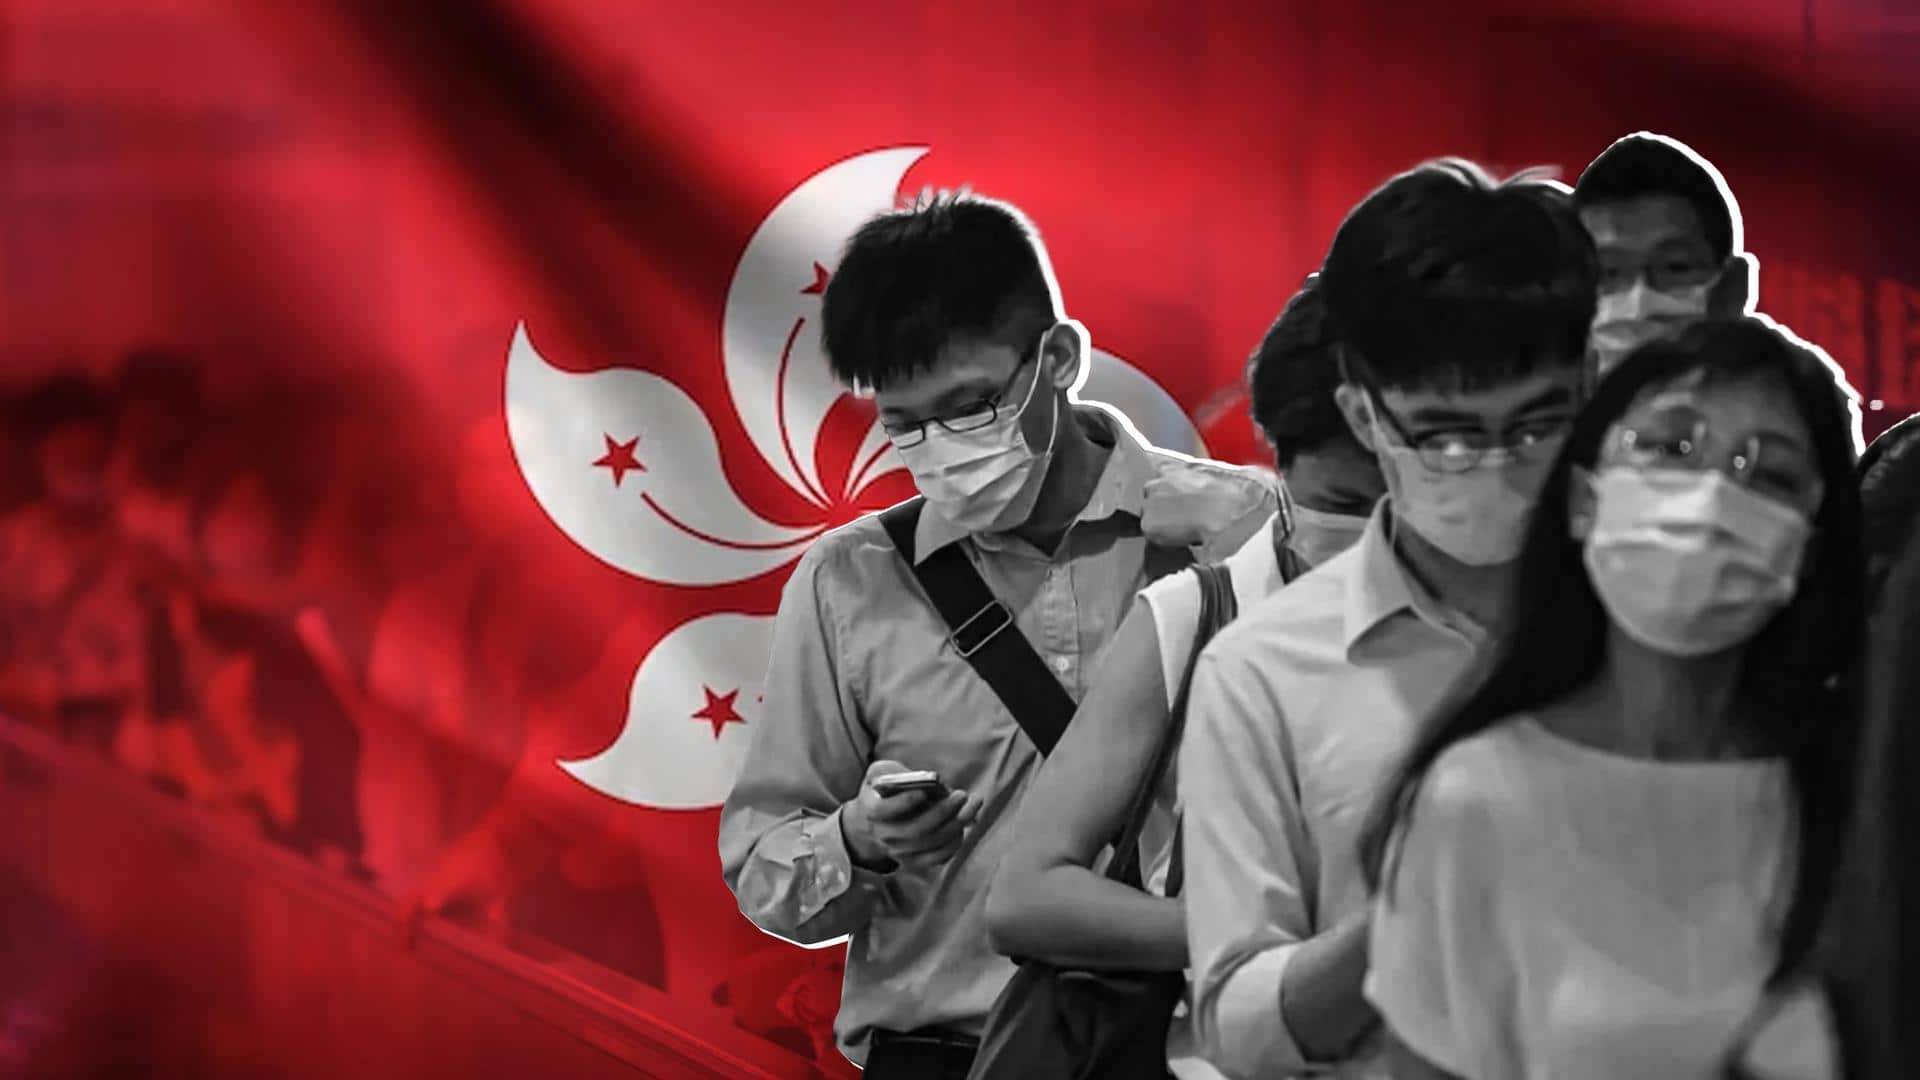 Hong Kong to end mask mandate after 3 years